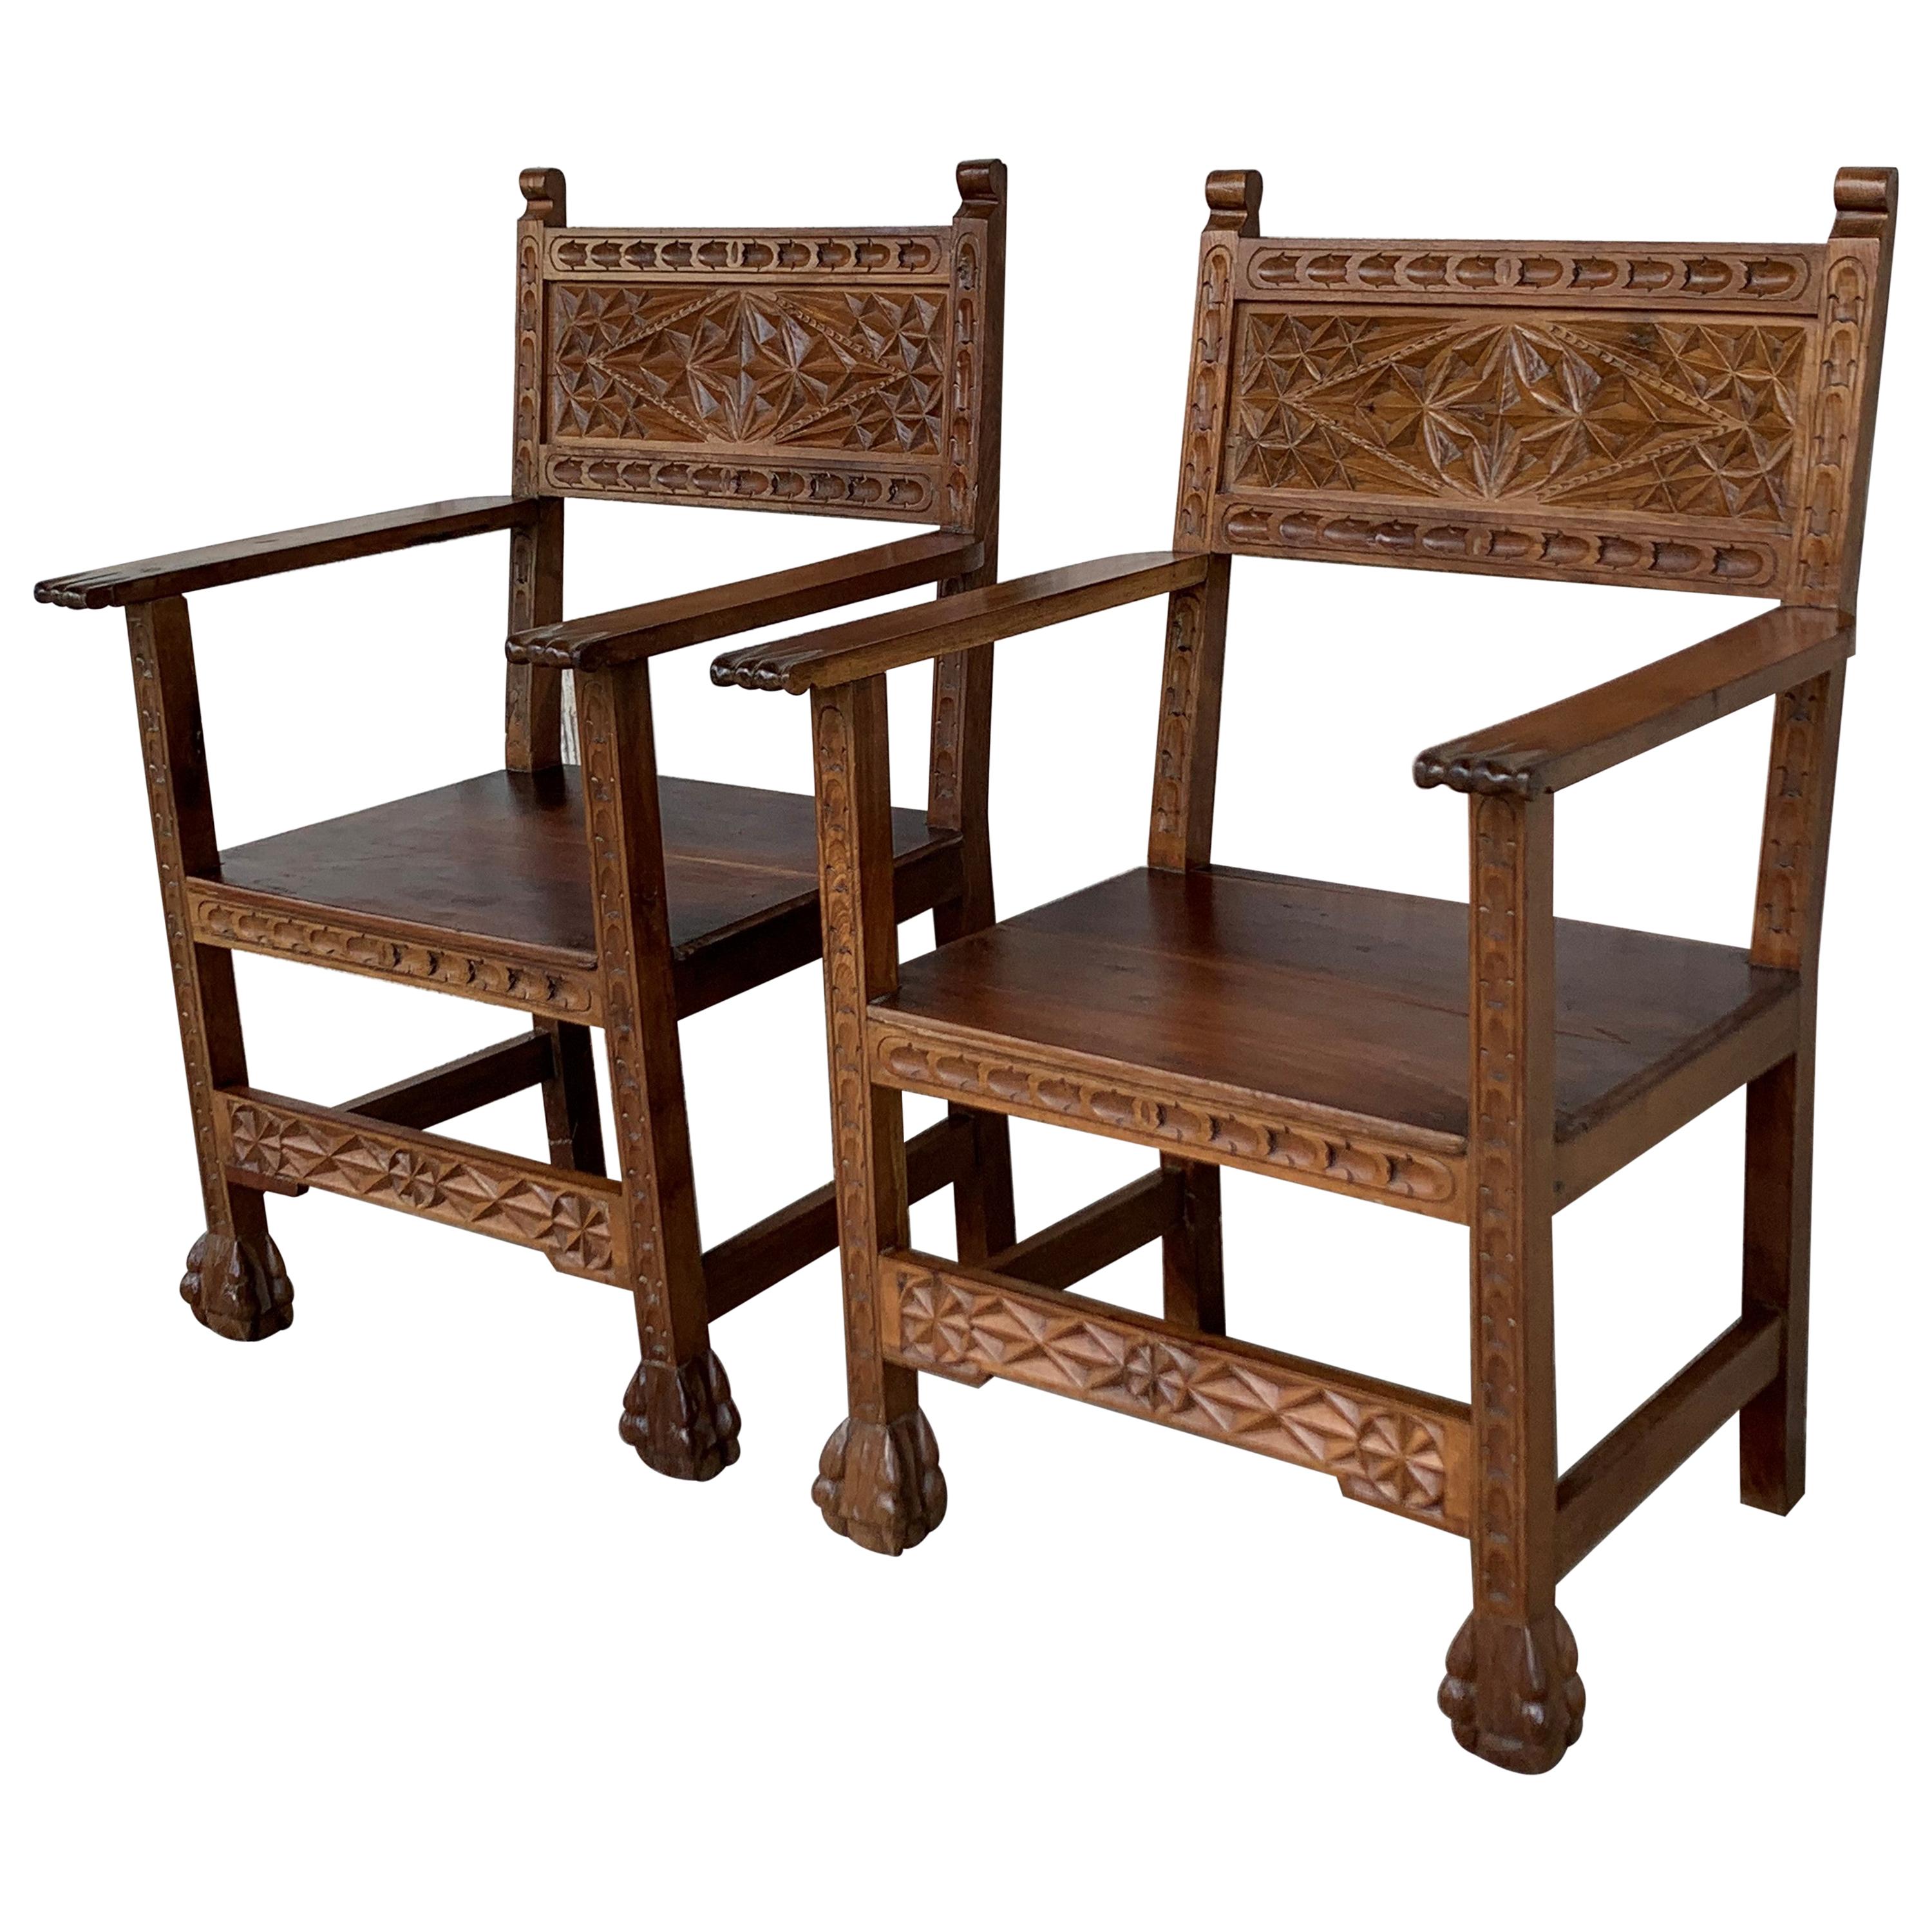 19th Century Spanish Colonial Altar Carved Armchairs with Wood Seat